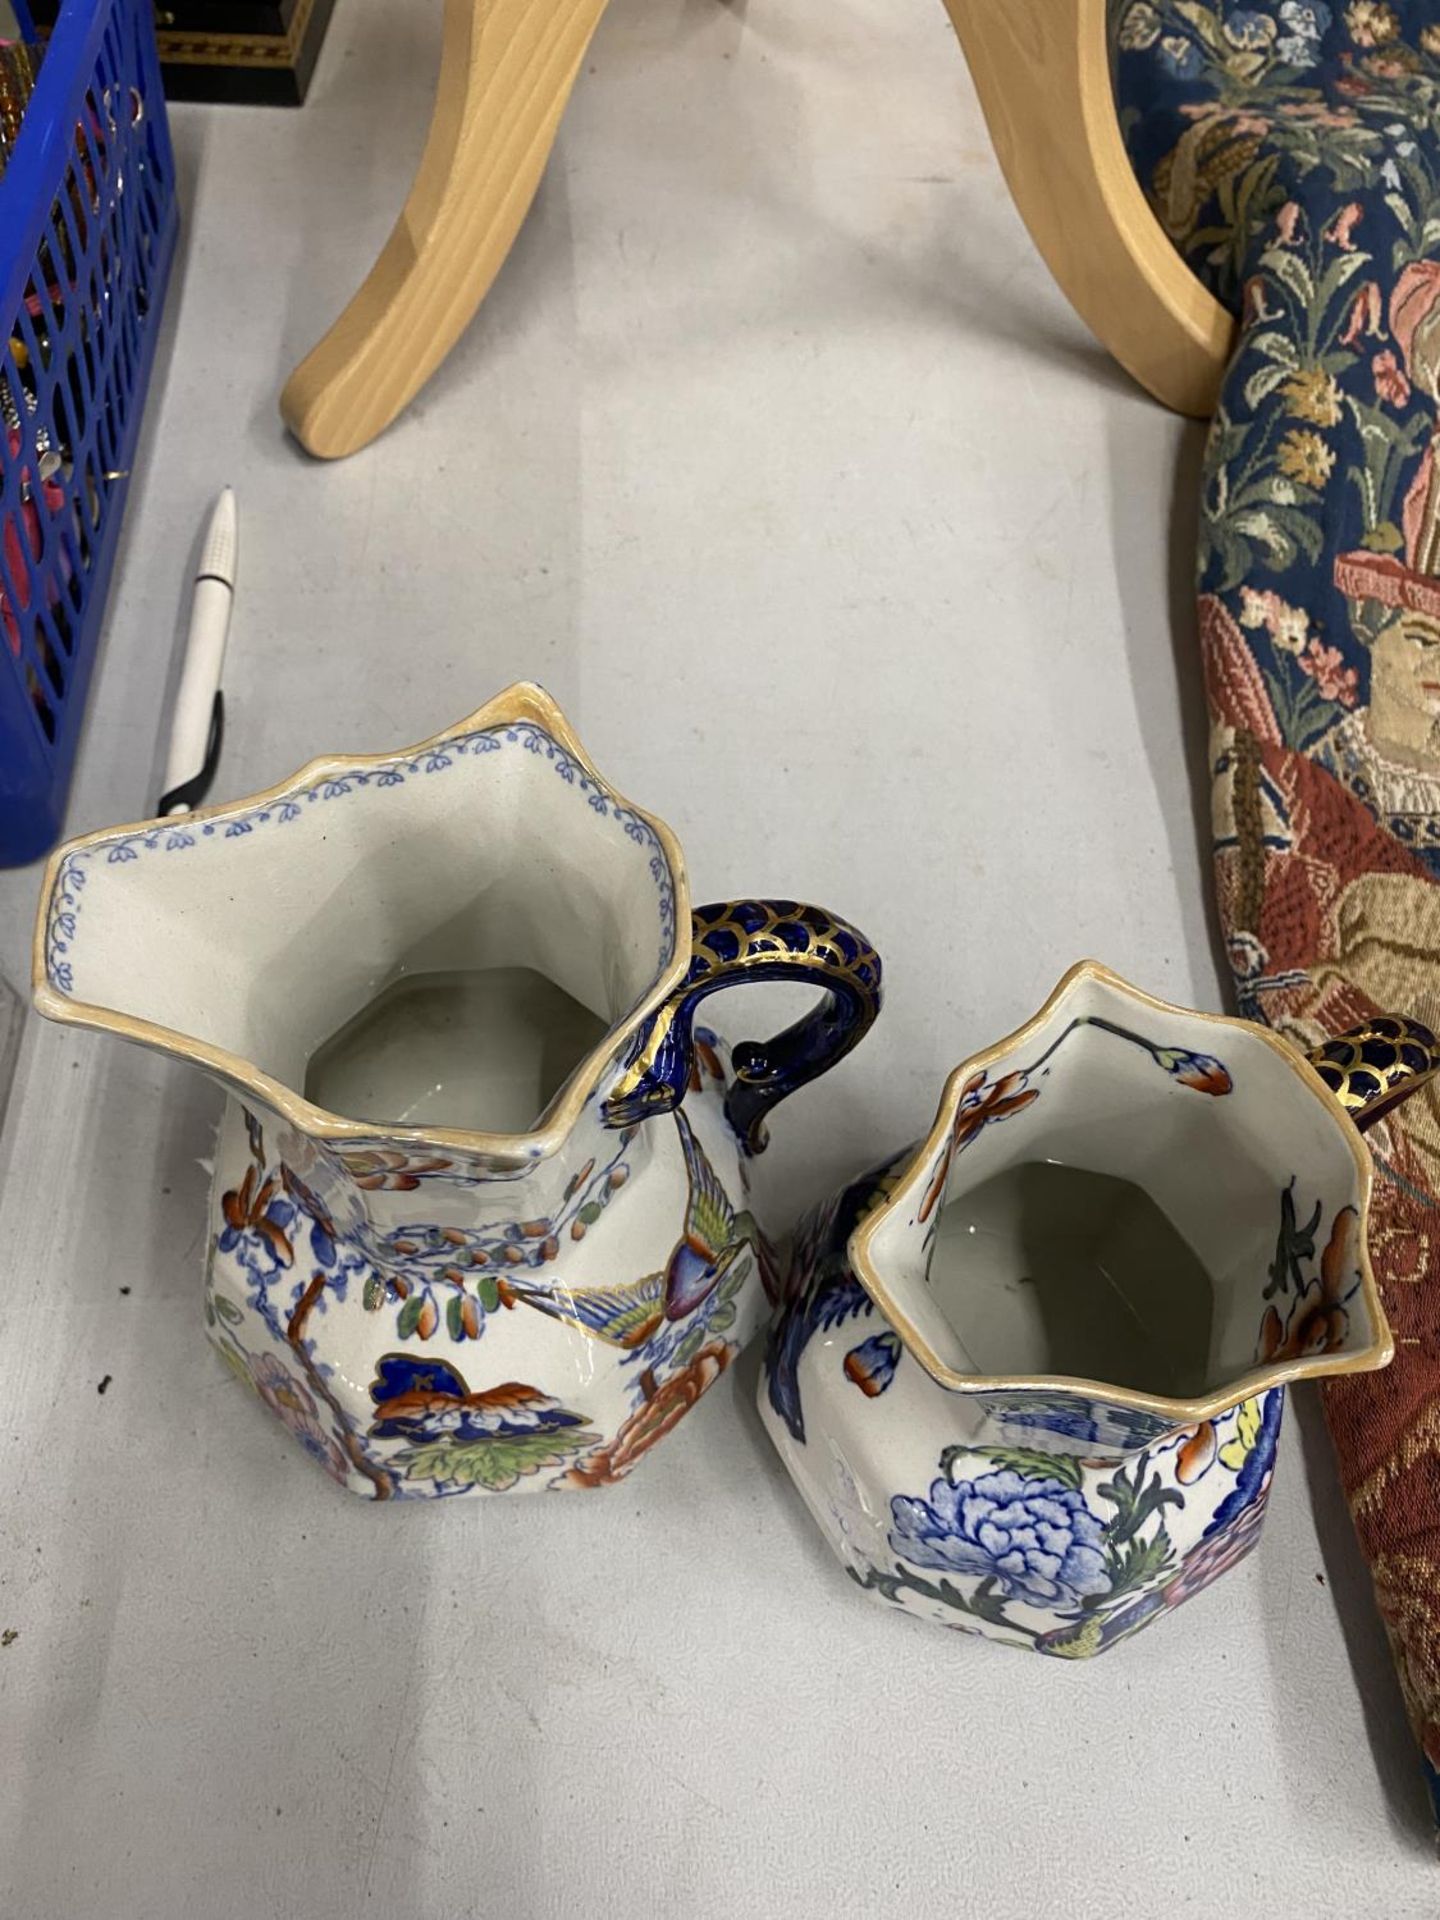 TWO MASONS IRONSTONE JUGS IN GOOD CONDITION - Image 2 of 4